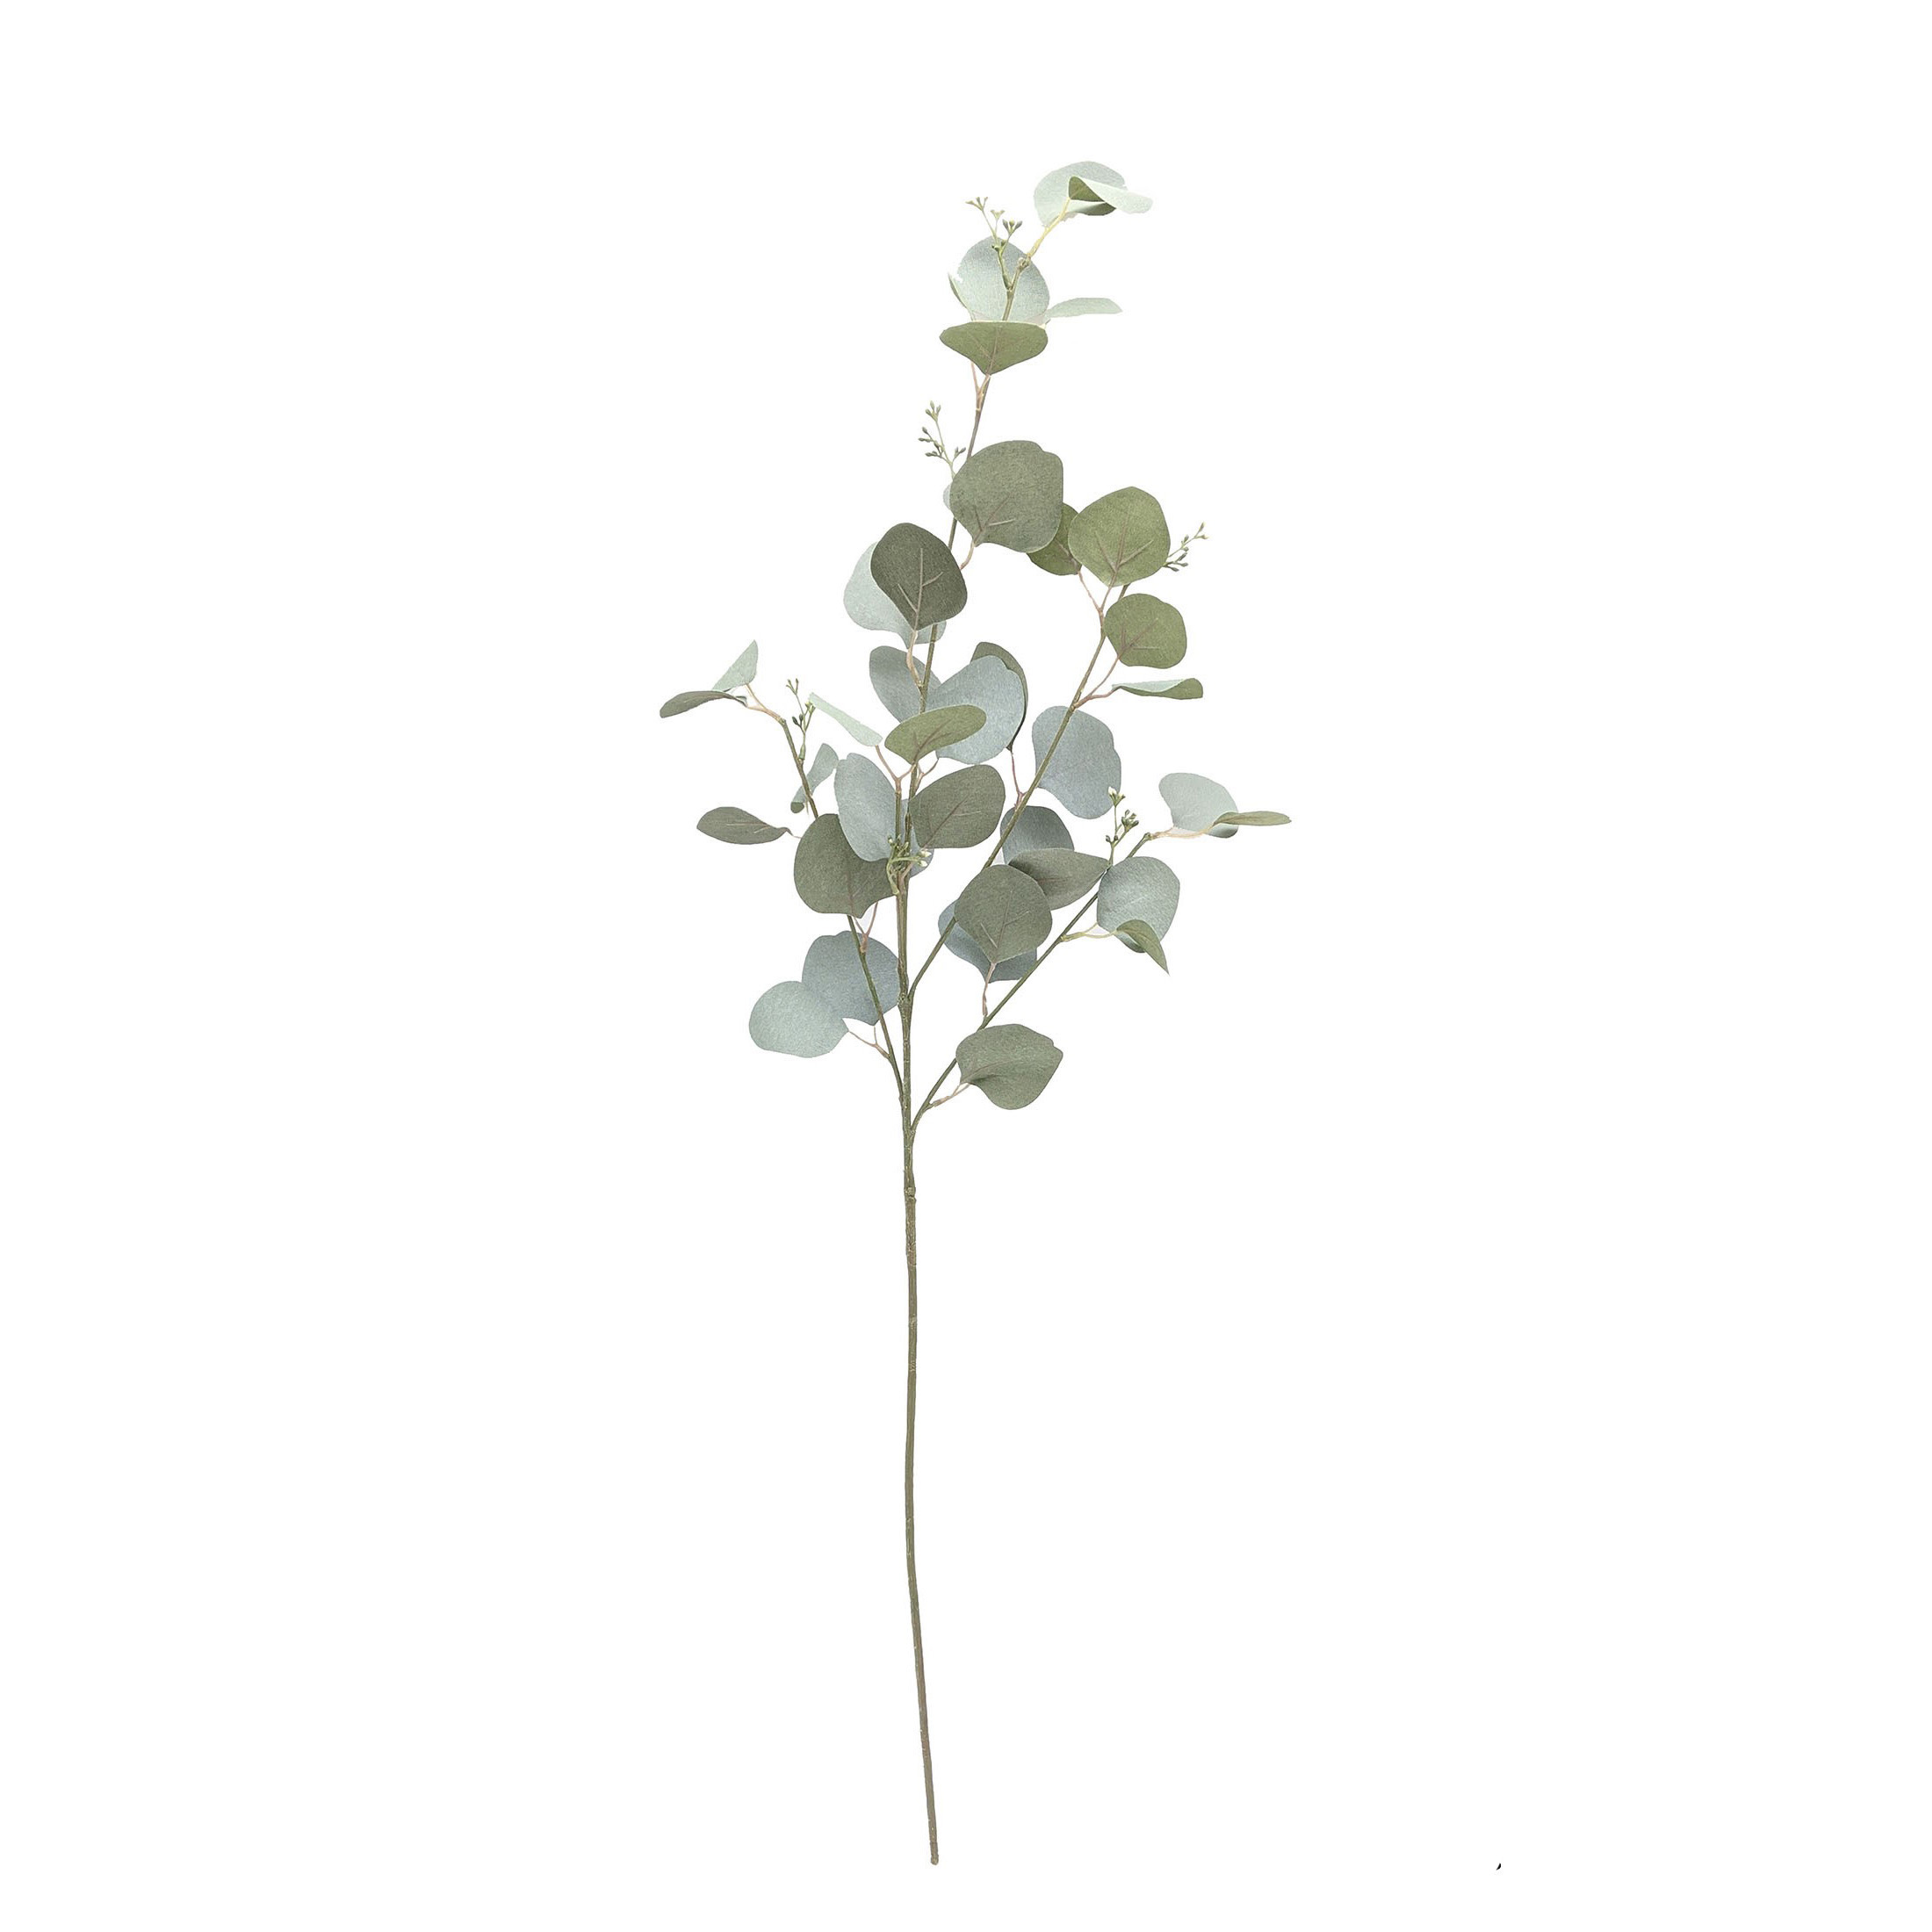 Mainstays Artificial Green Round Leaf Eucalyptus Stem, 34in Tall Floral Picks - image 1 of 5